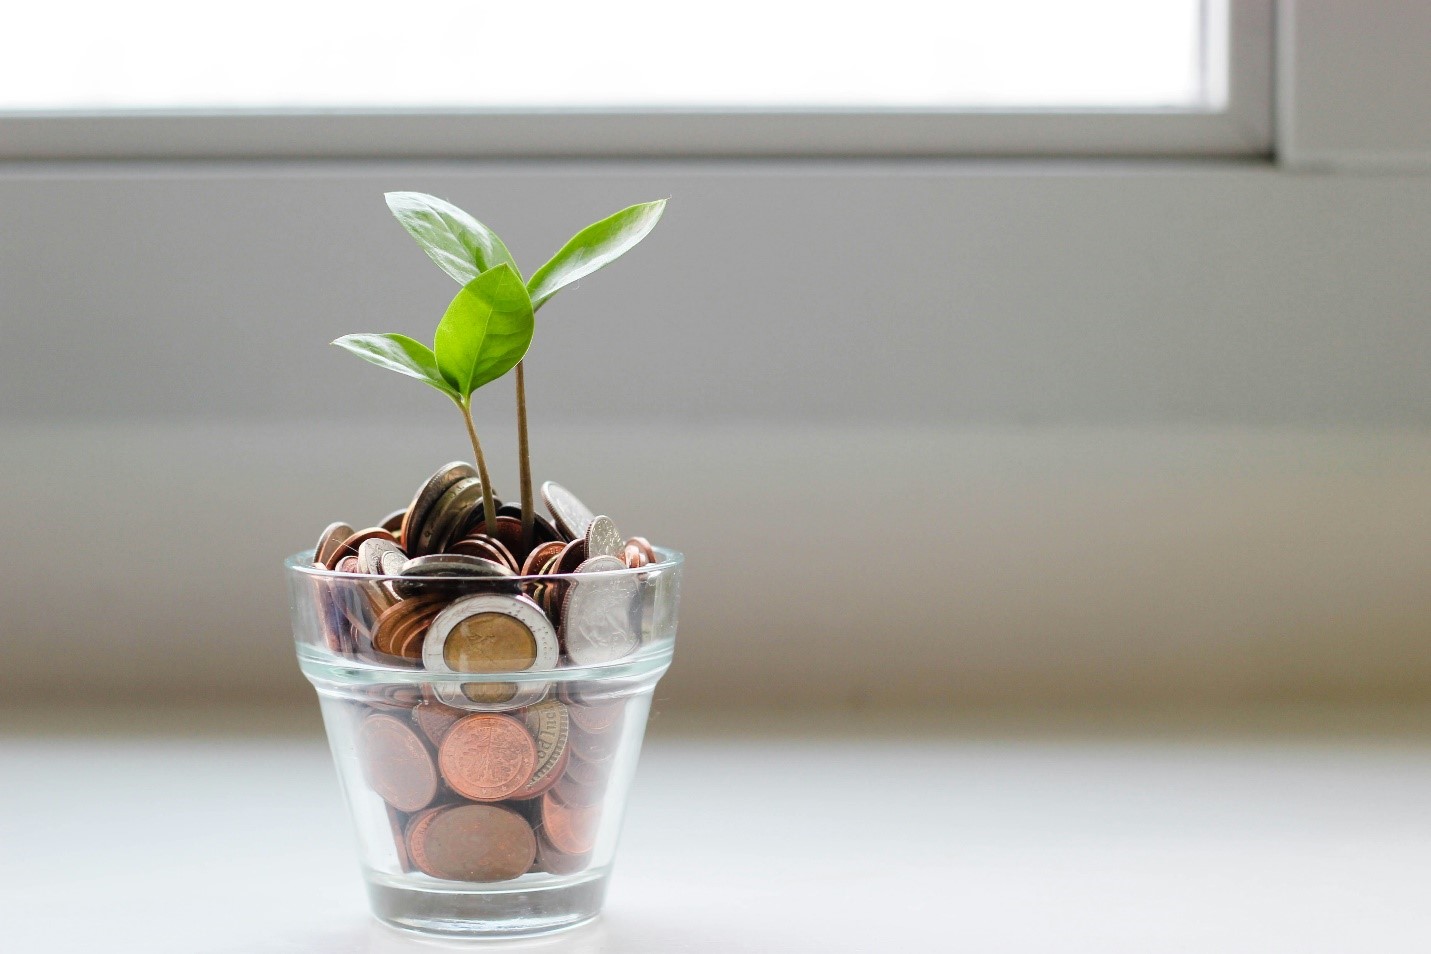 A jar fill with coins and plant